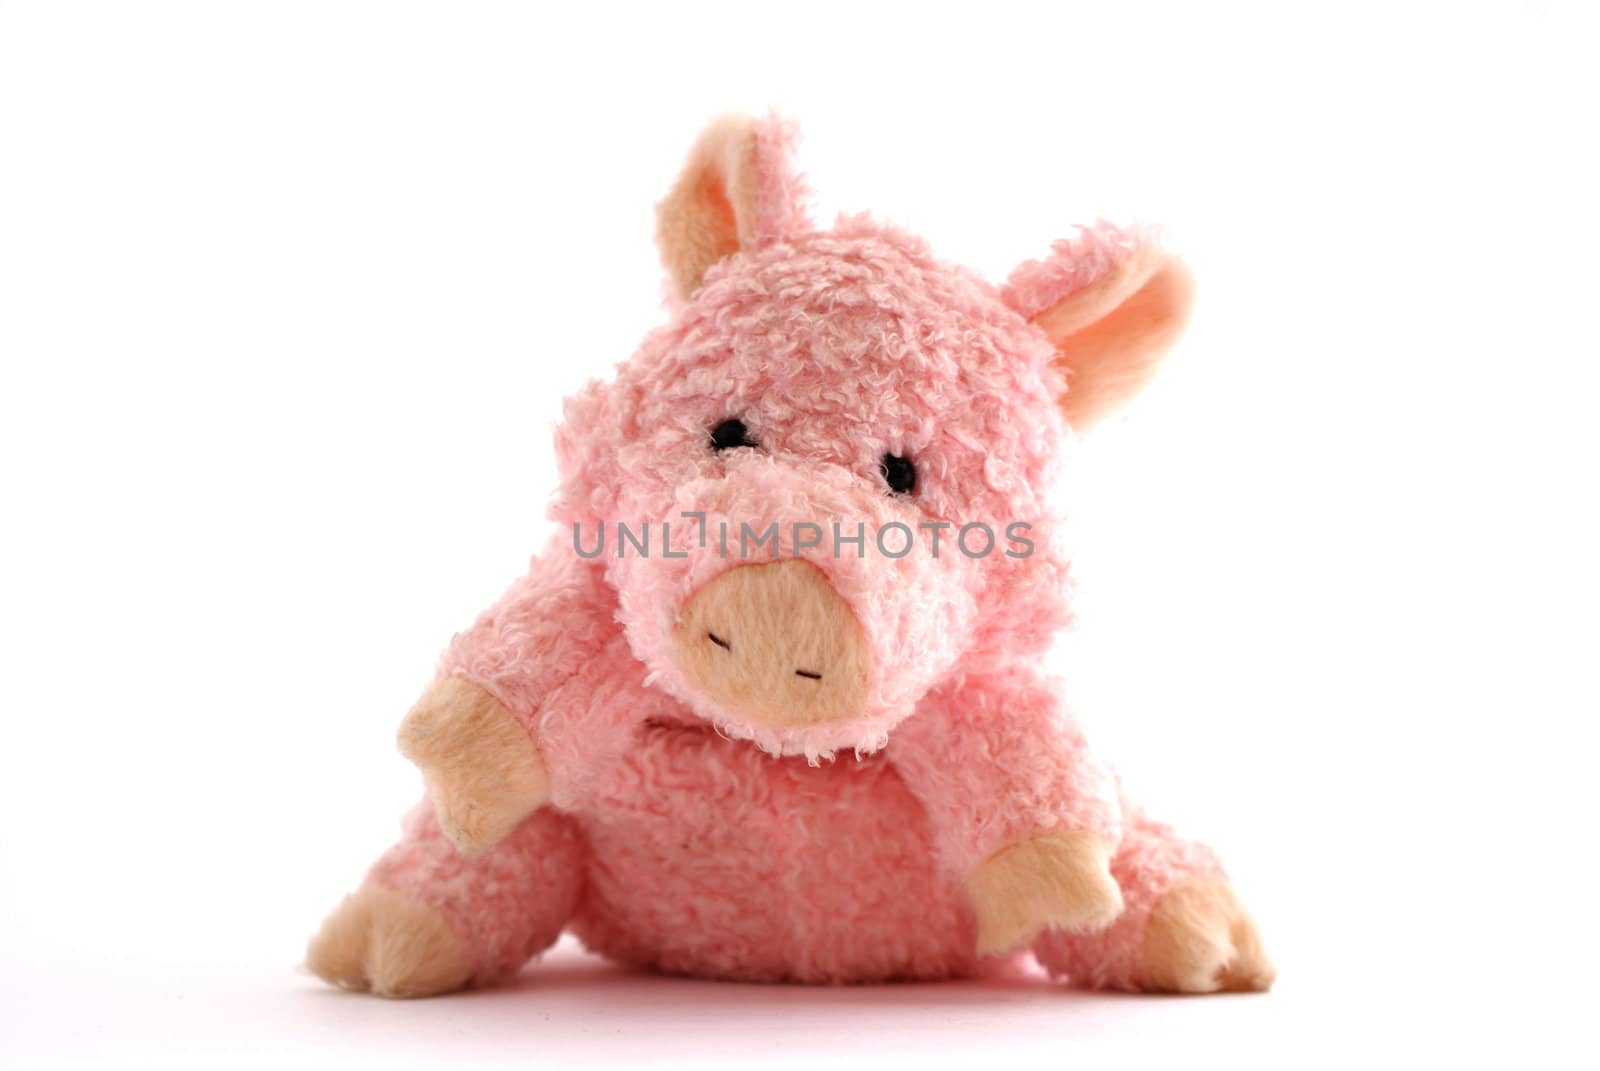 pink stuffed piglet isolated against white background